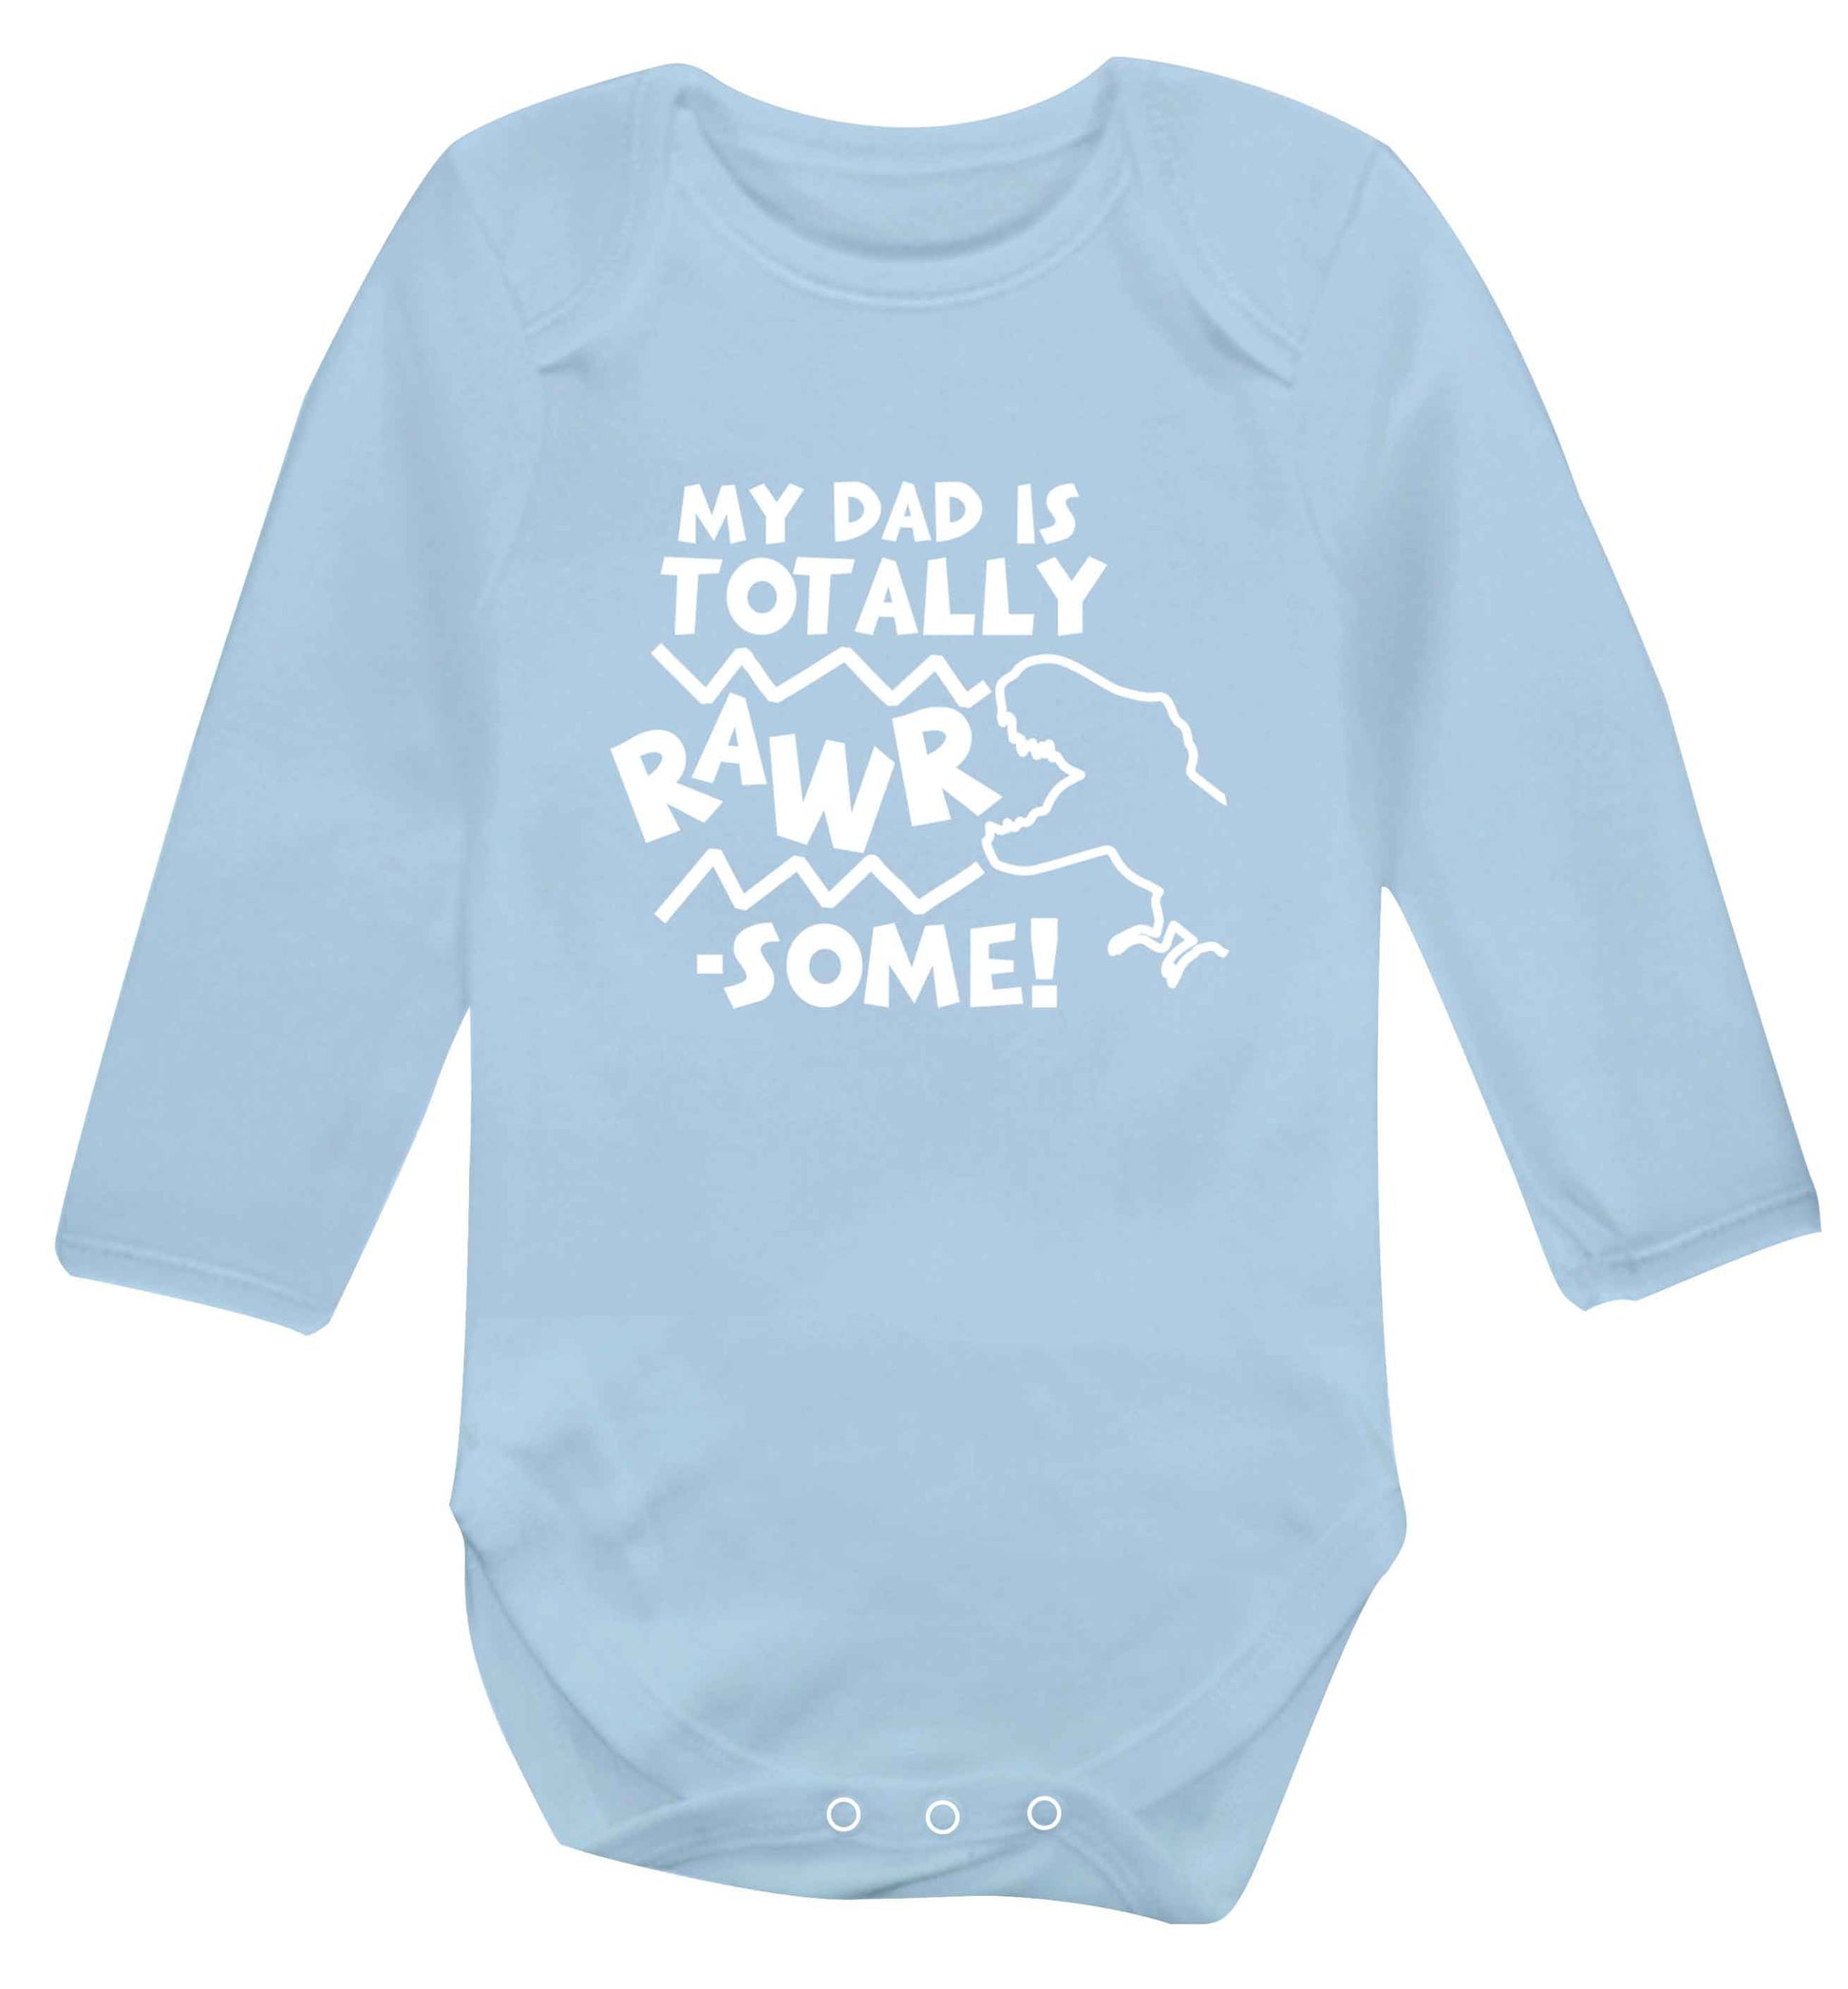 My dad is totally rawrsome baby vest long sleeved pale blue 6-12 months